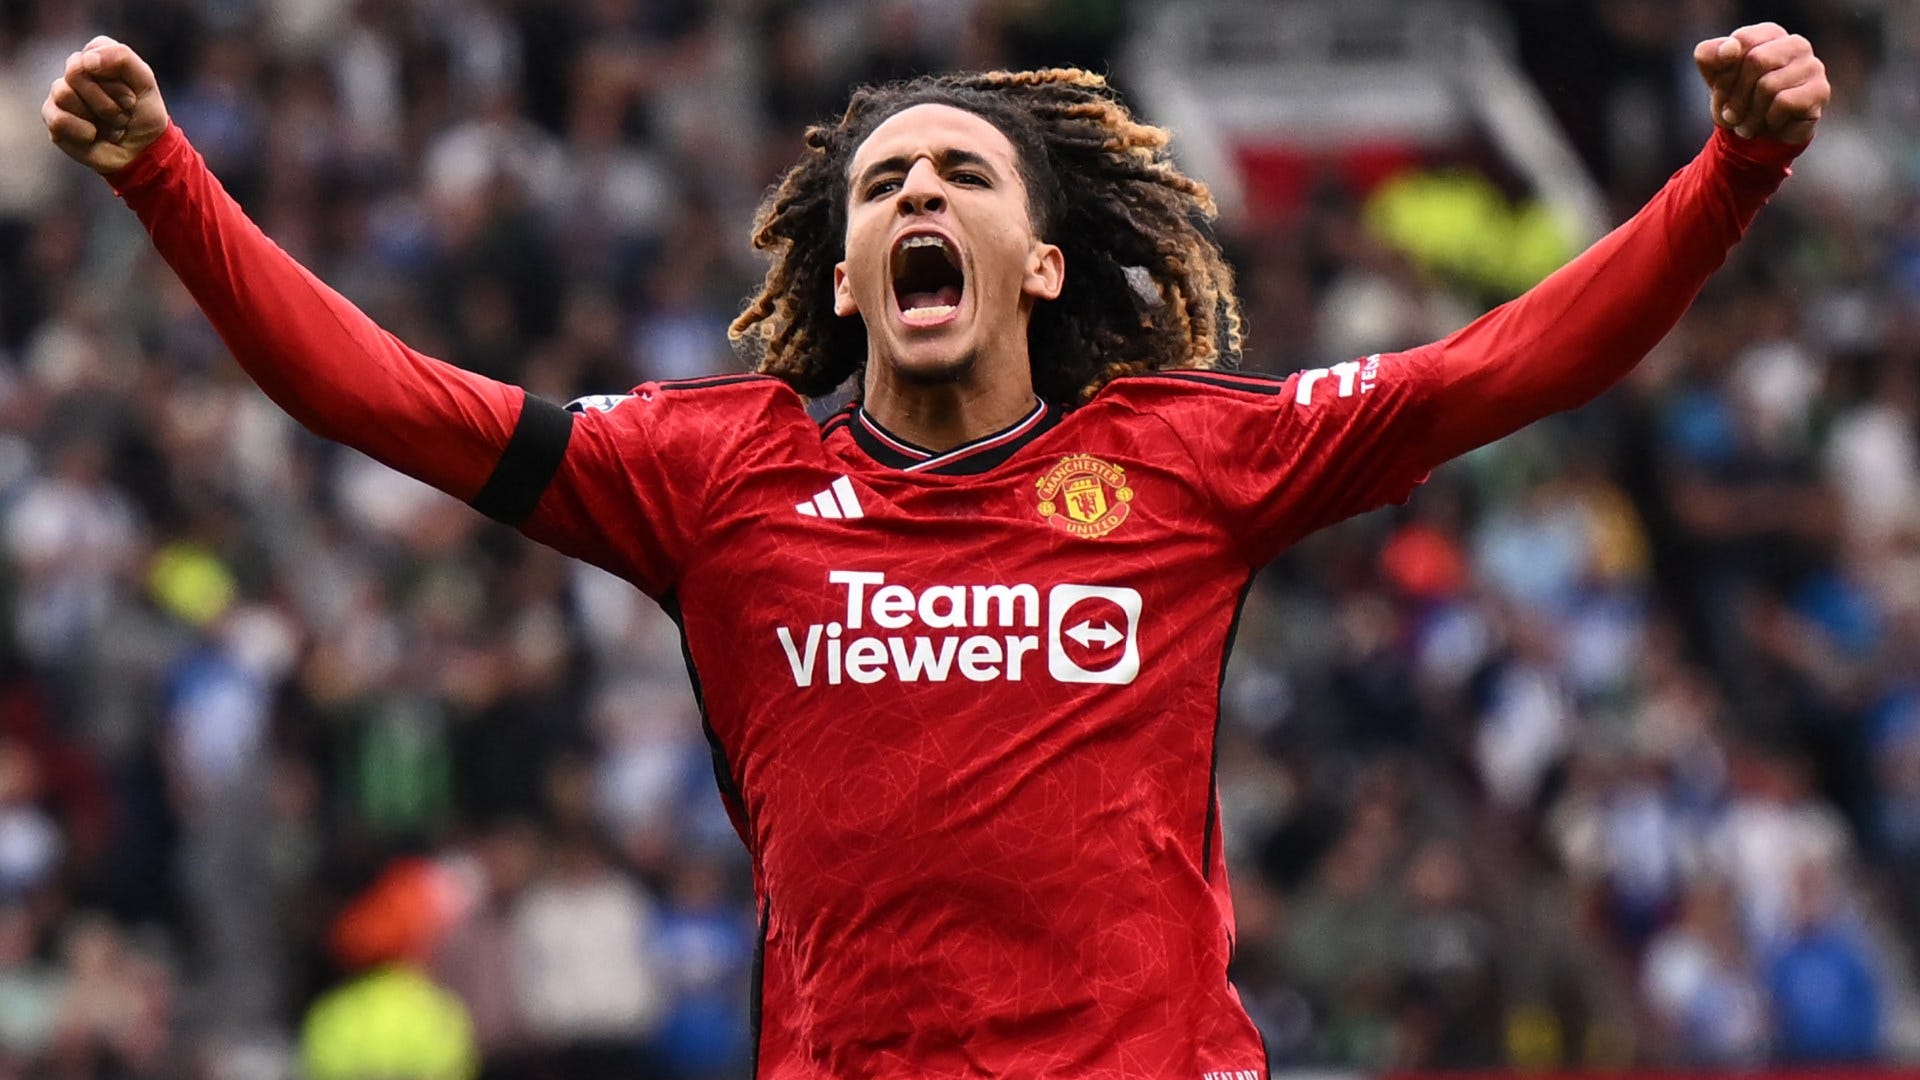 Hannibal Mejbri is Man Utd's secret weapon! Youngster is a pressing machine and the youthful energy Erik ten Hag needs in dark times